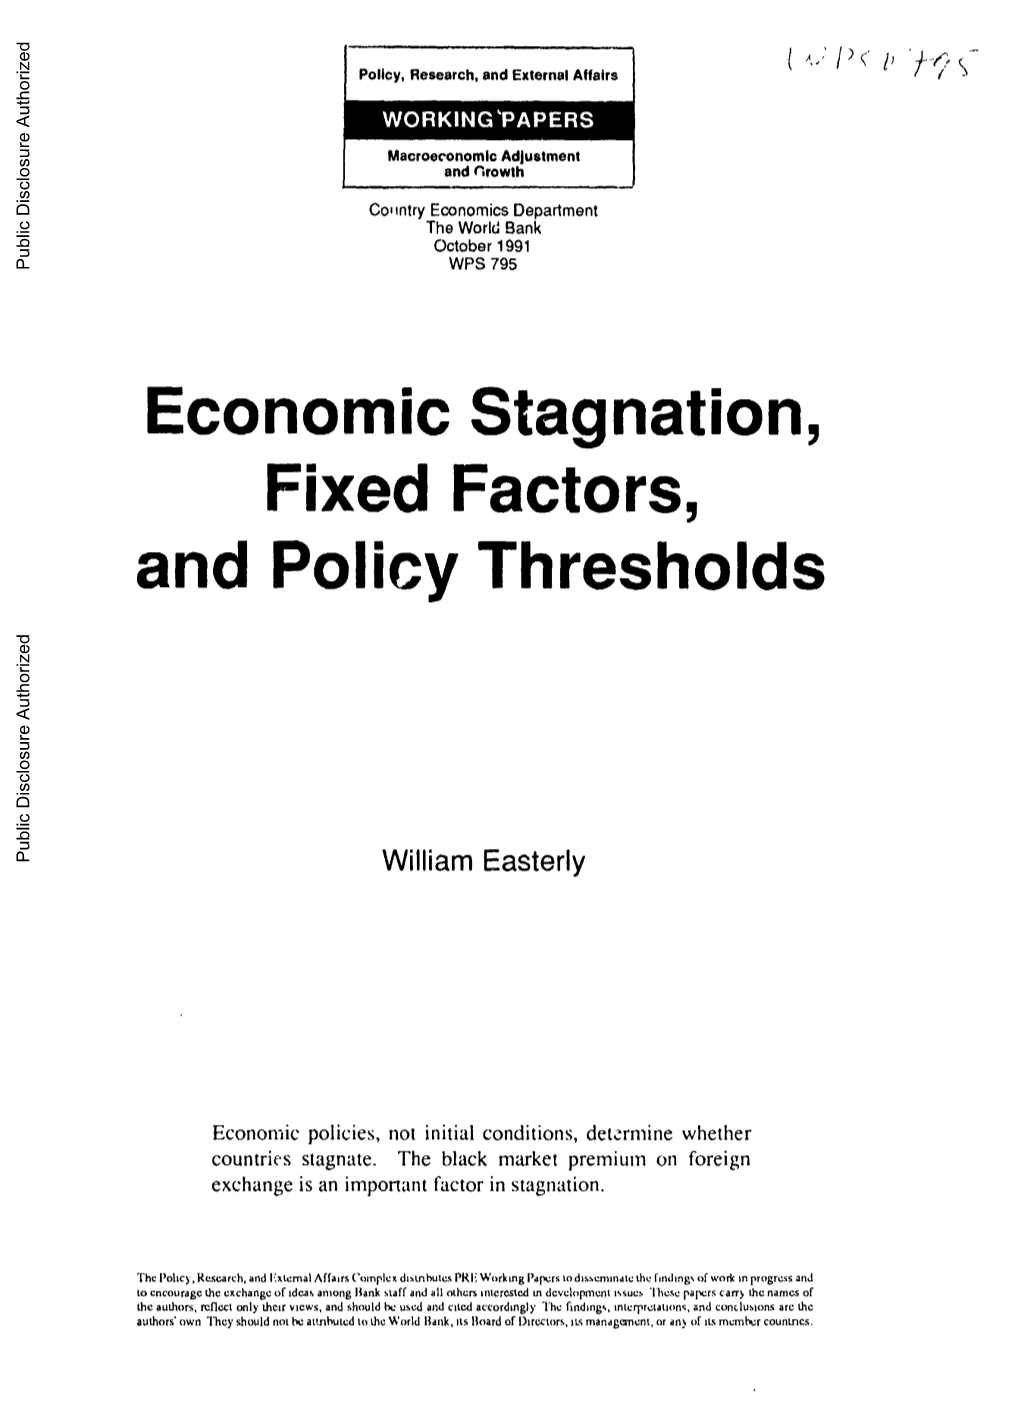 Economic Stagnation, Fixed Factors, and Policy